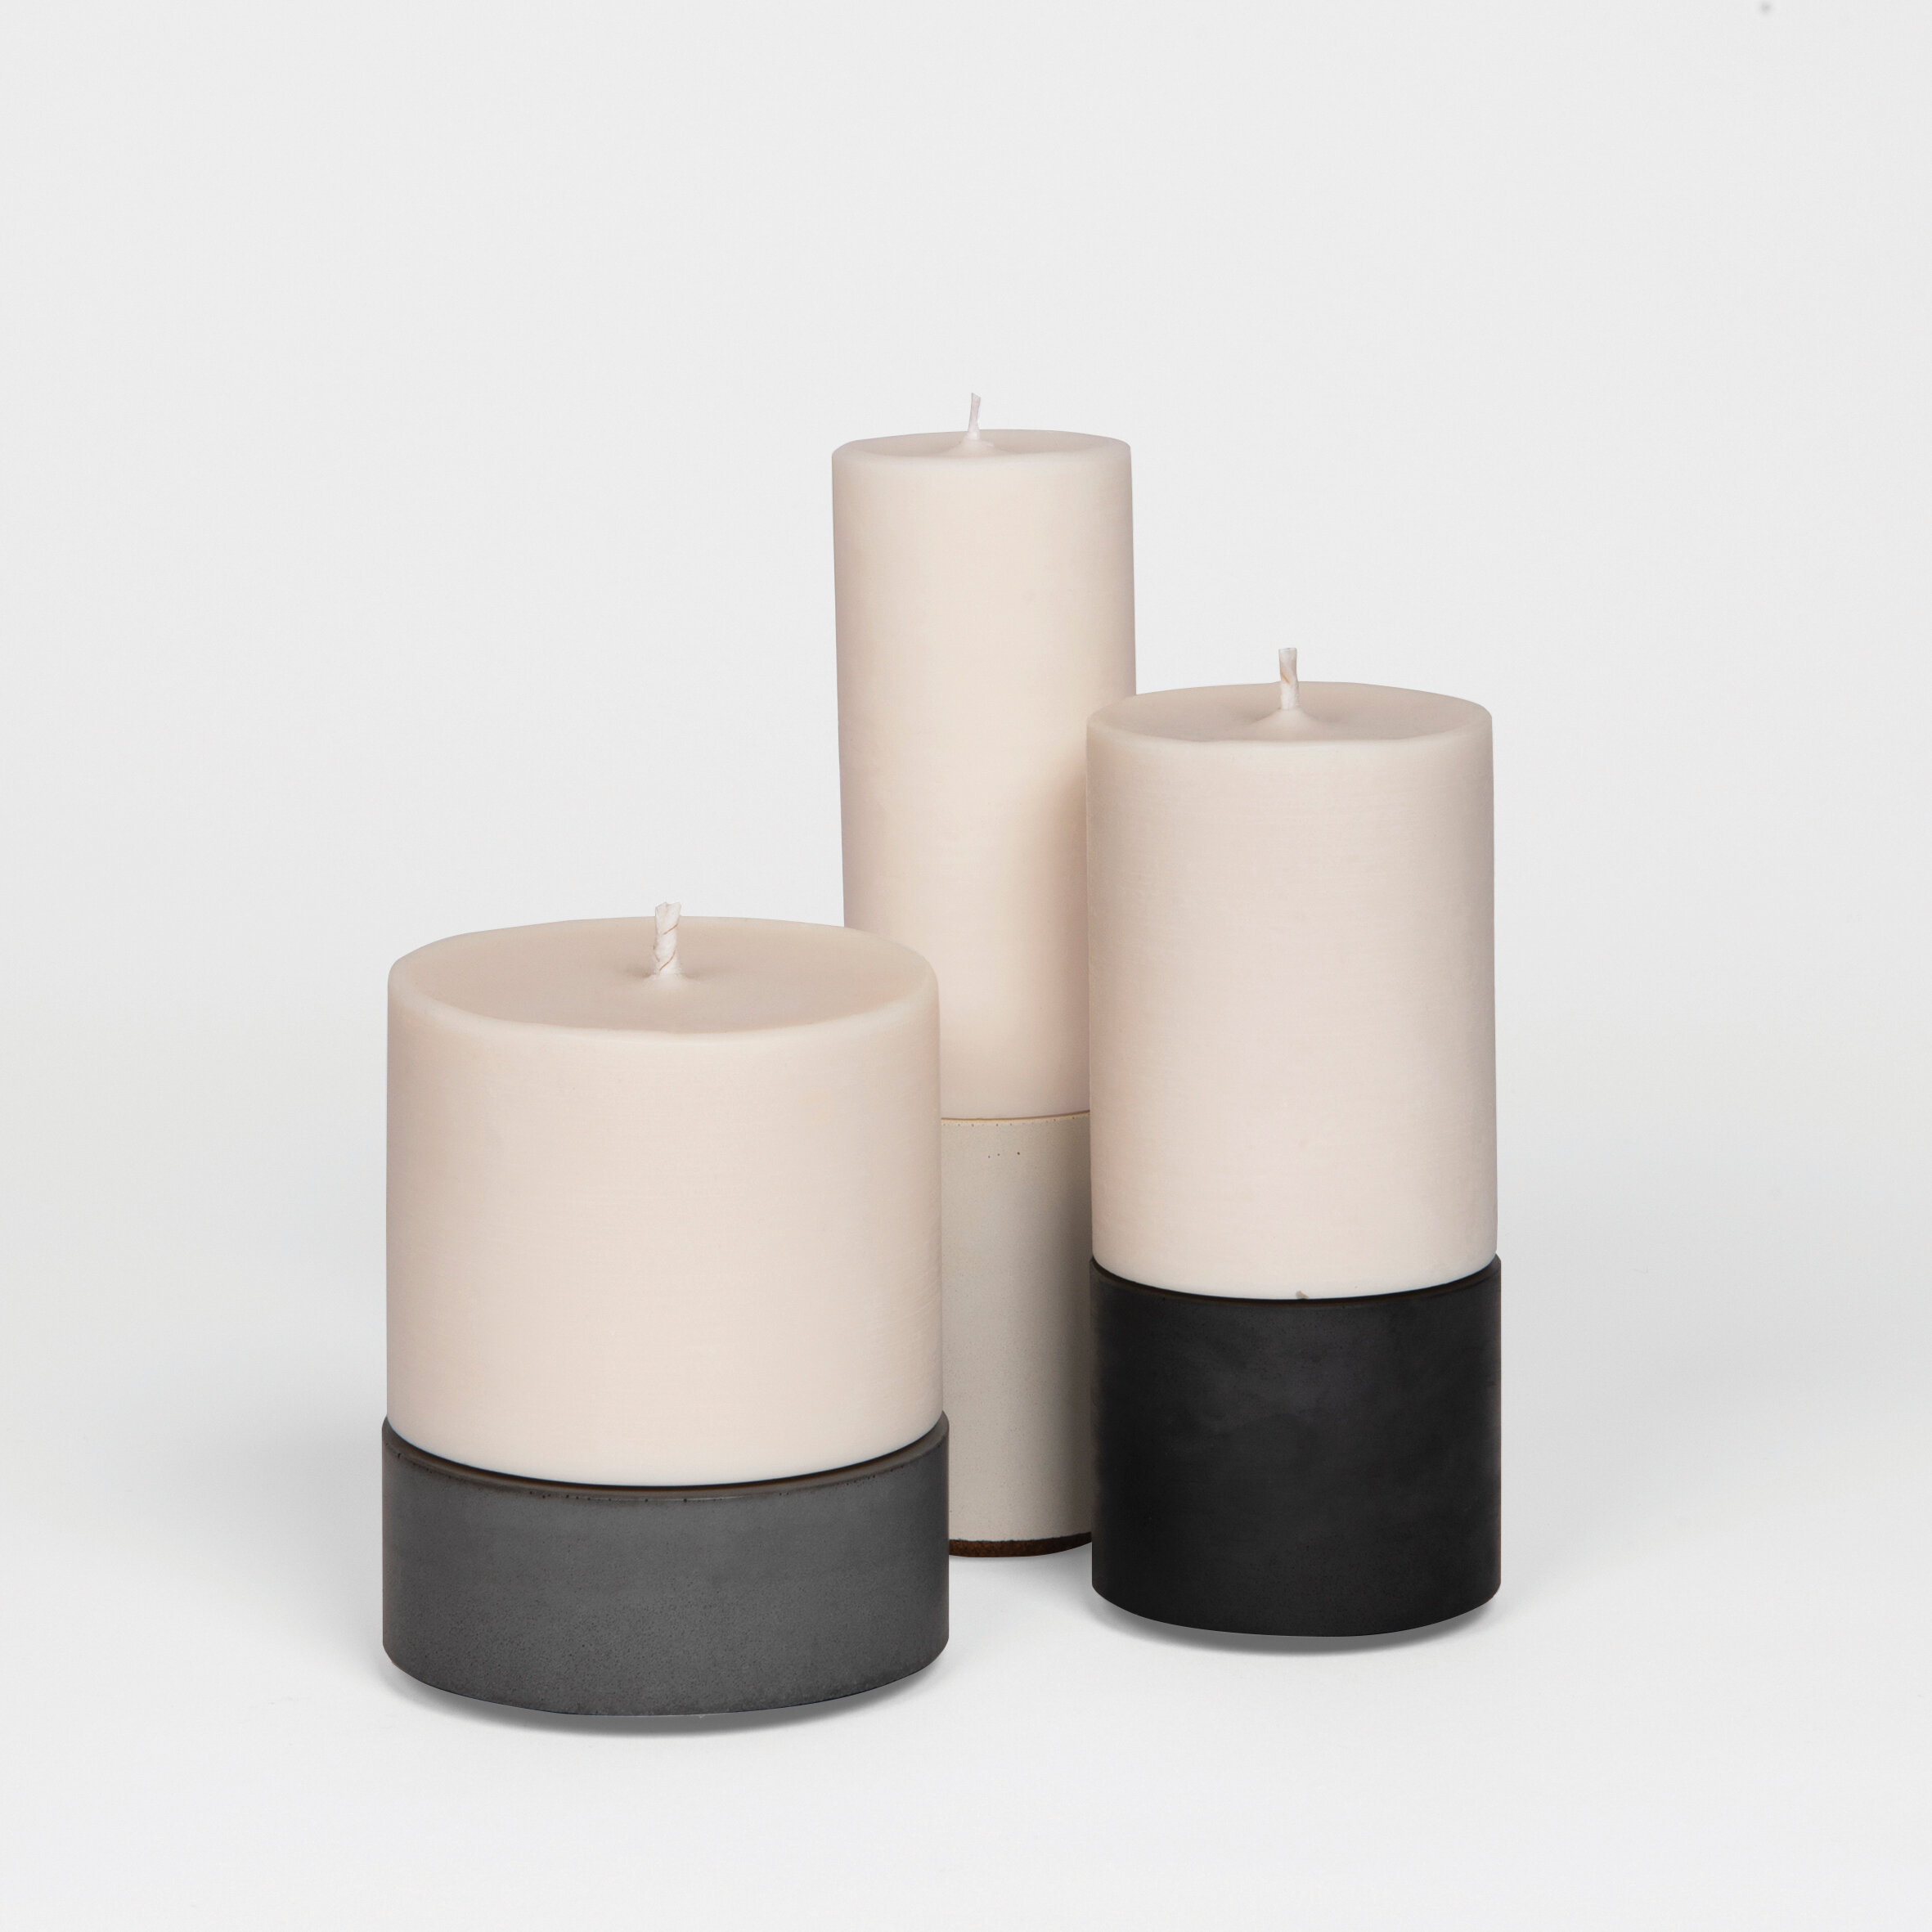 Concrete &amp; Wax Modular Candles | Styles &amp; Price vary